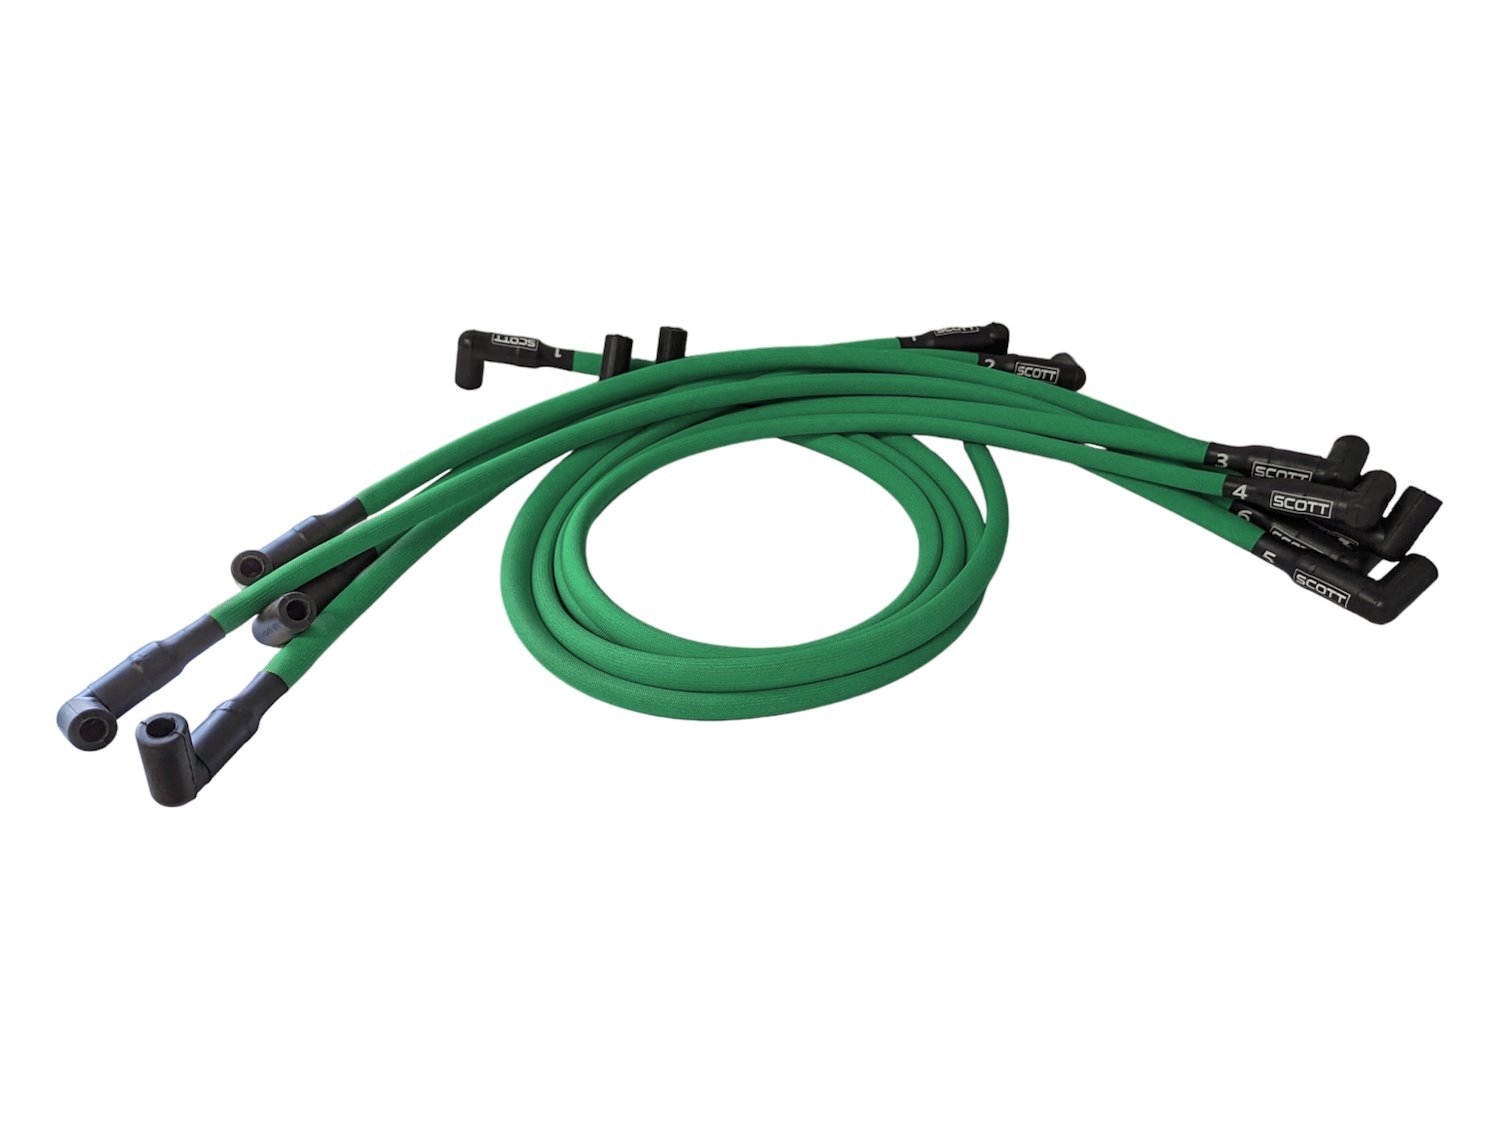 SPW300-PS-435-4 Super Mag Fiberglass-Oversleeved Spark Plug Wire Set for Small Block Chevy, Around Front [Green]